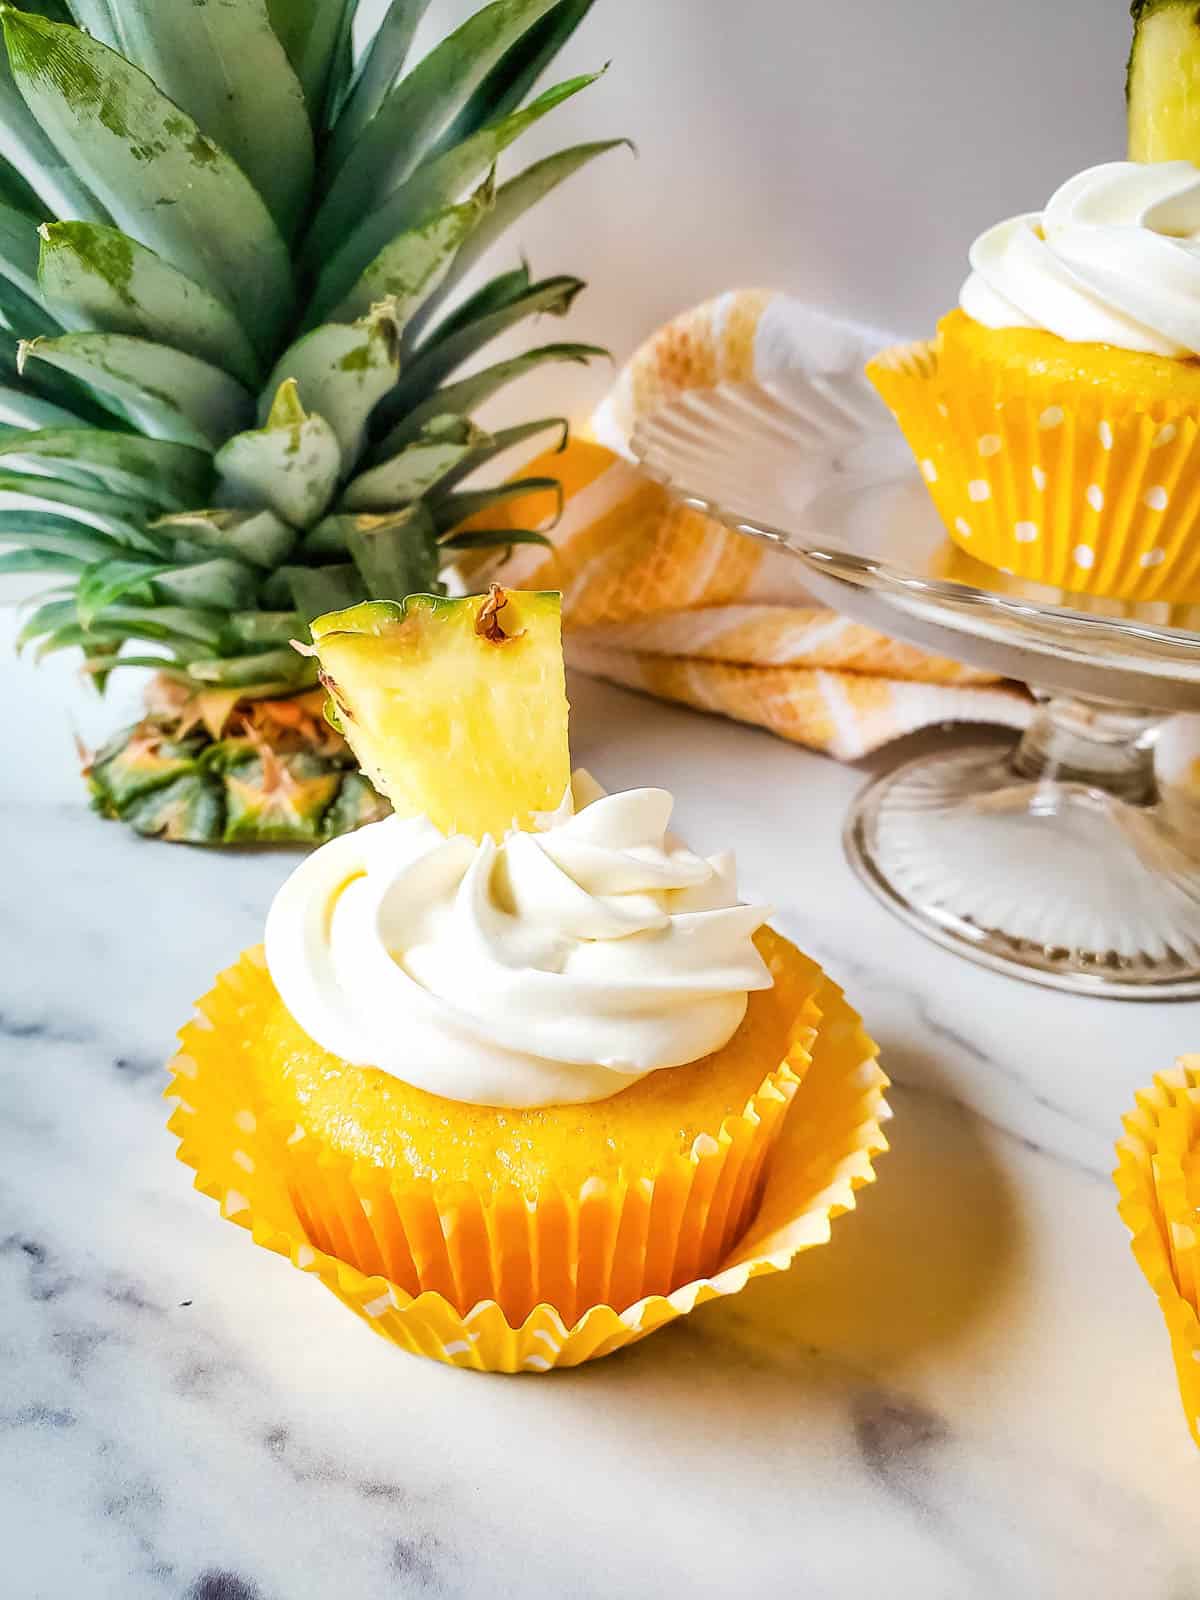 A single pineapple cupcake topped with fresh pineapple in front of a cake stand holding another cupcake and a pineapple top.